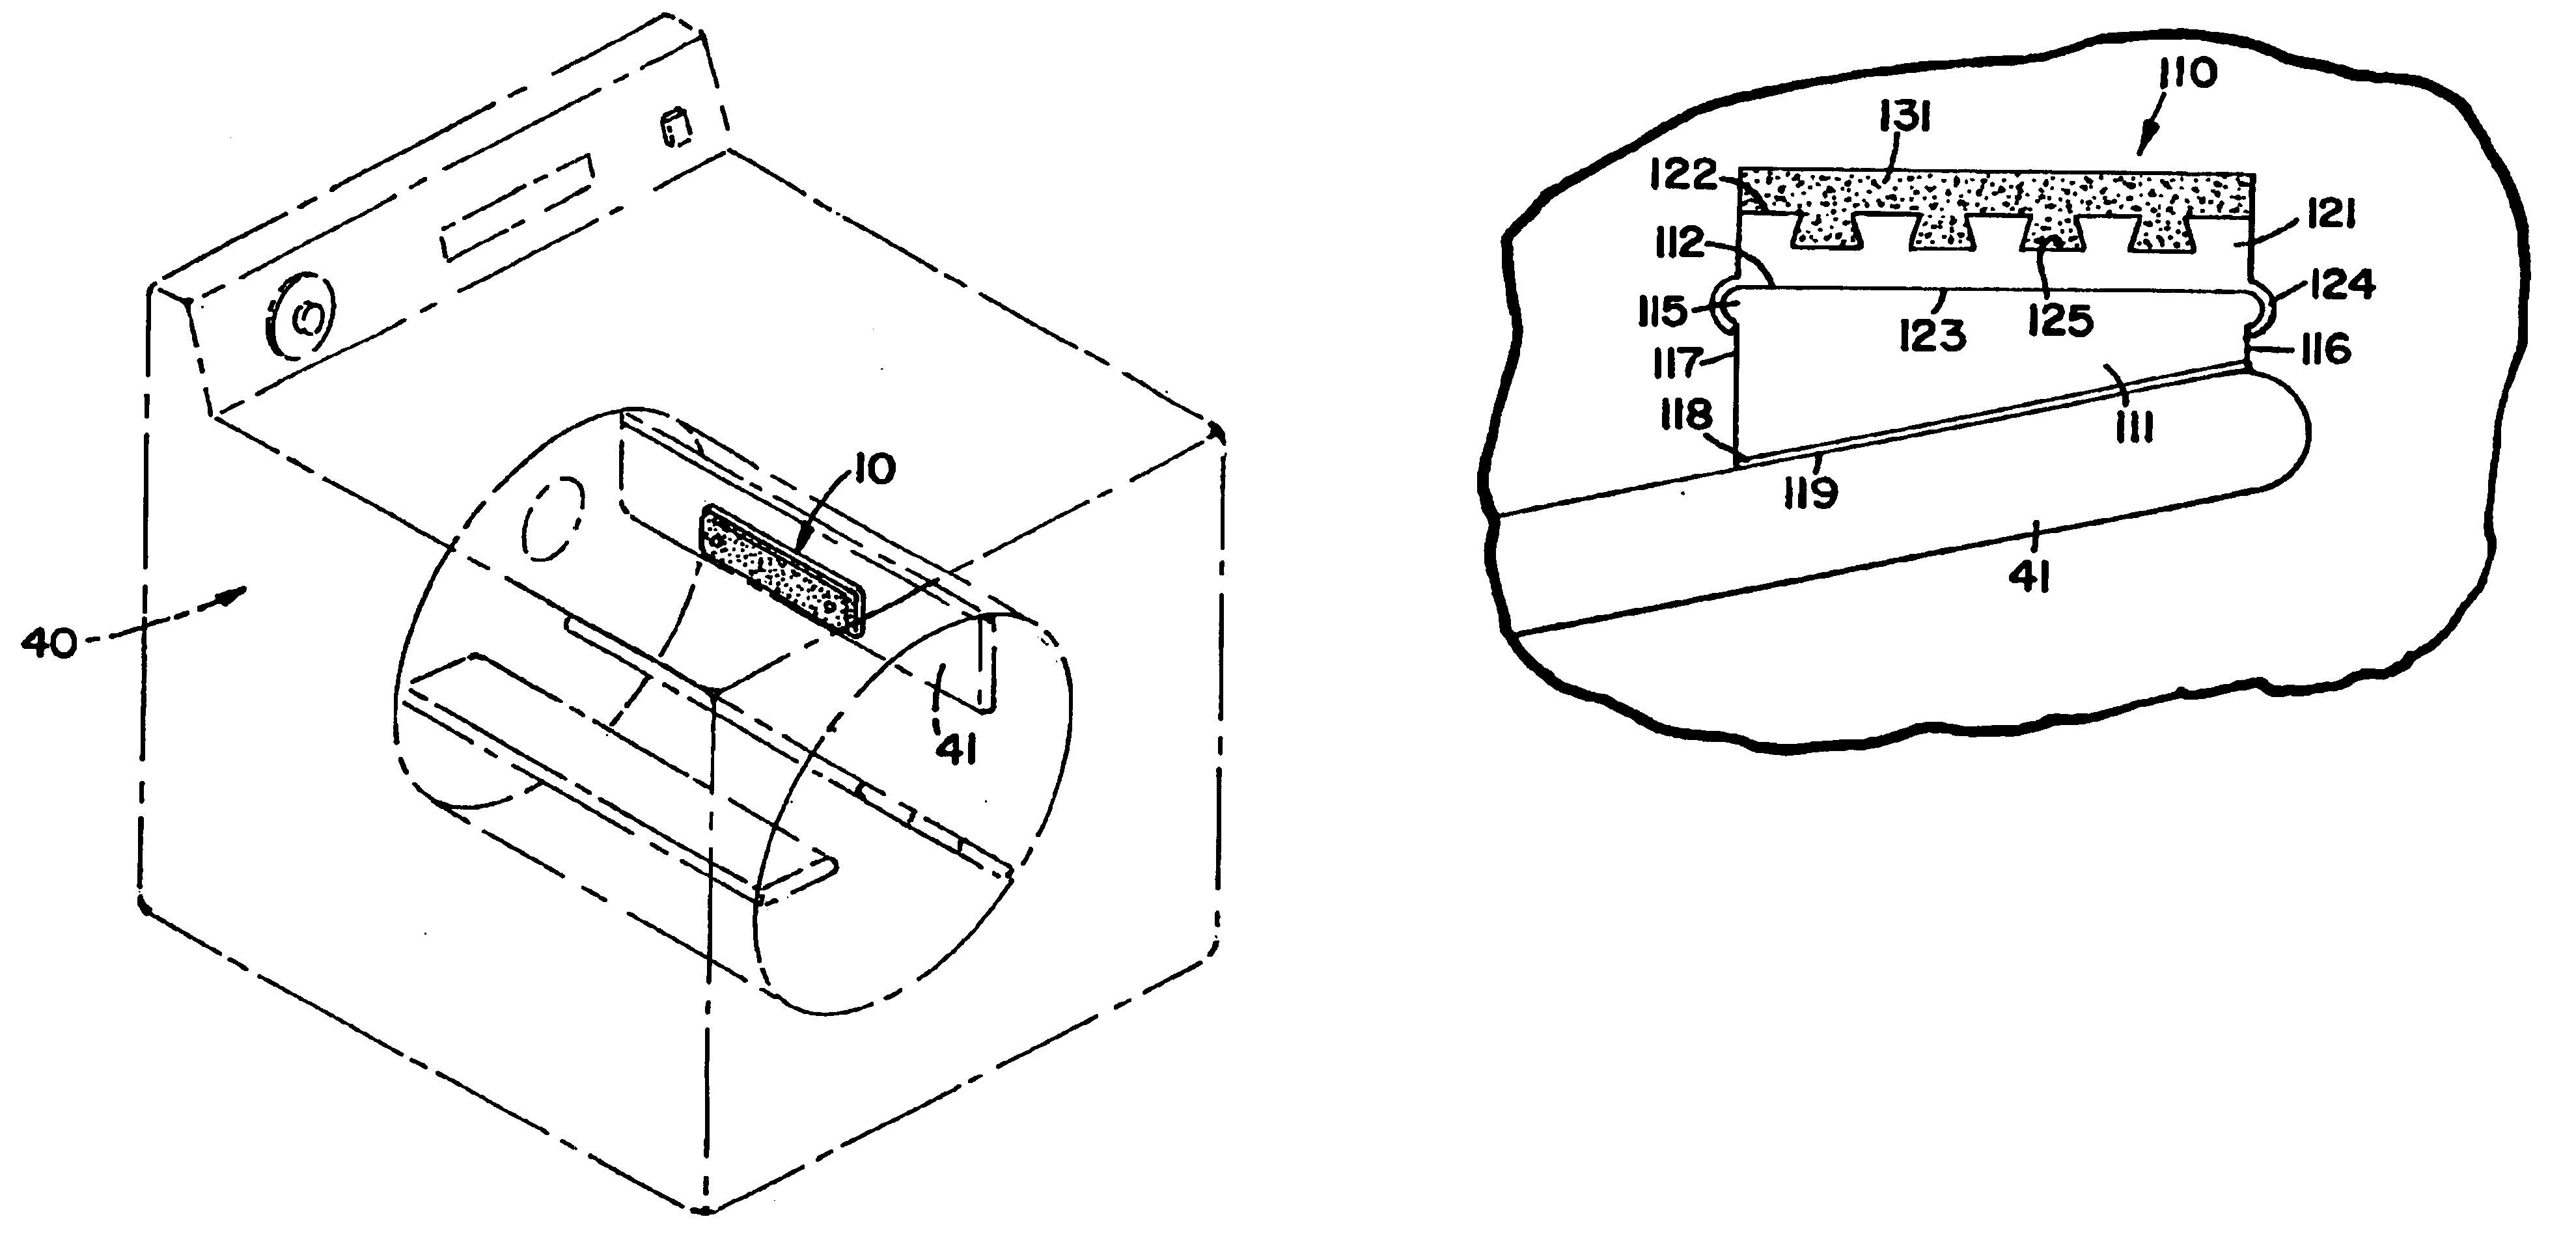 Product dispenser and carrier